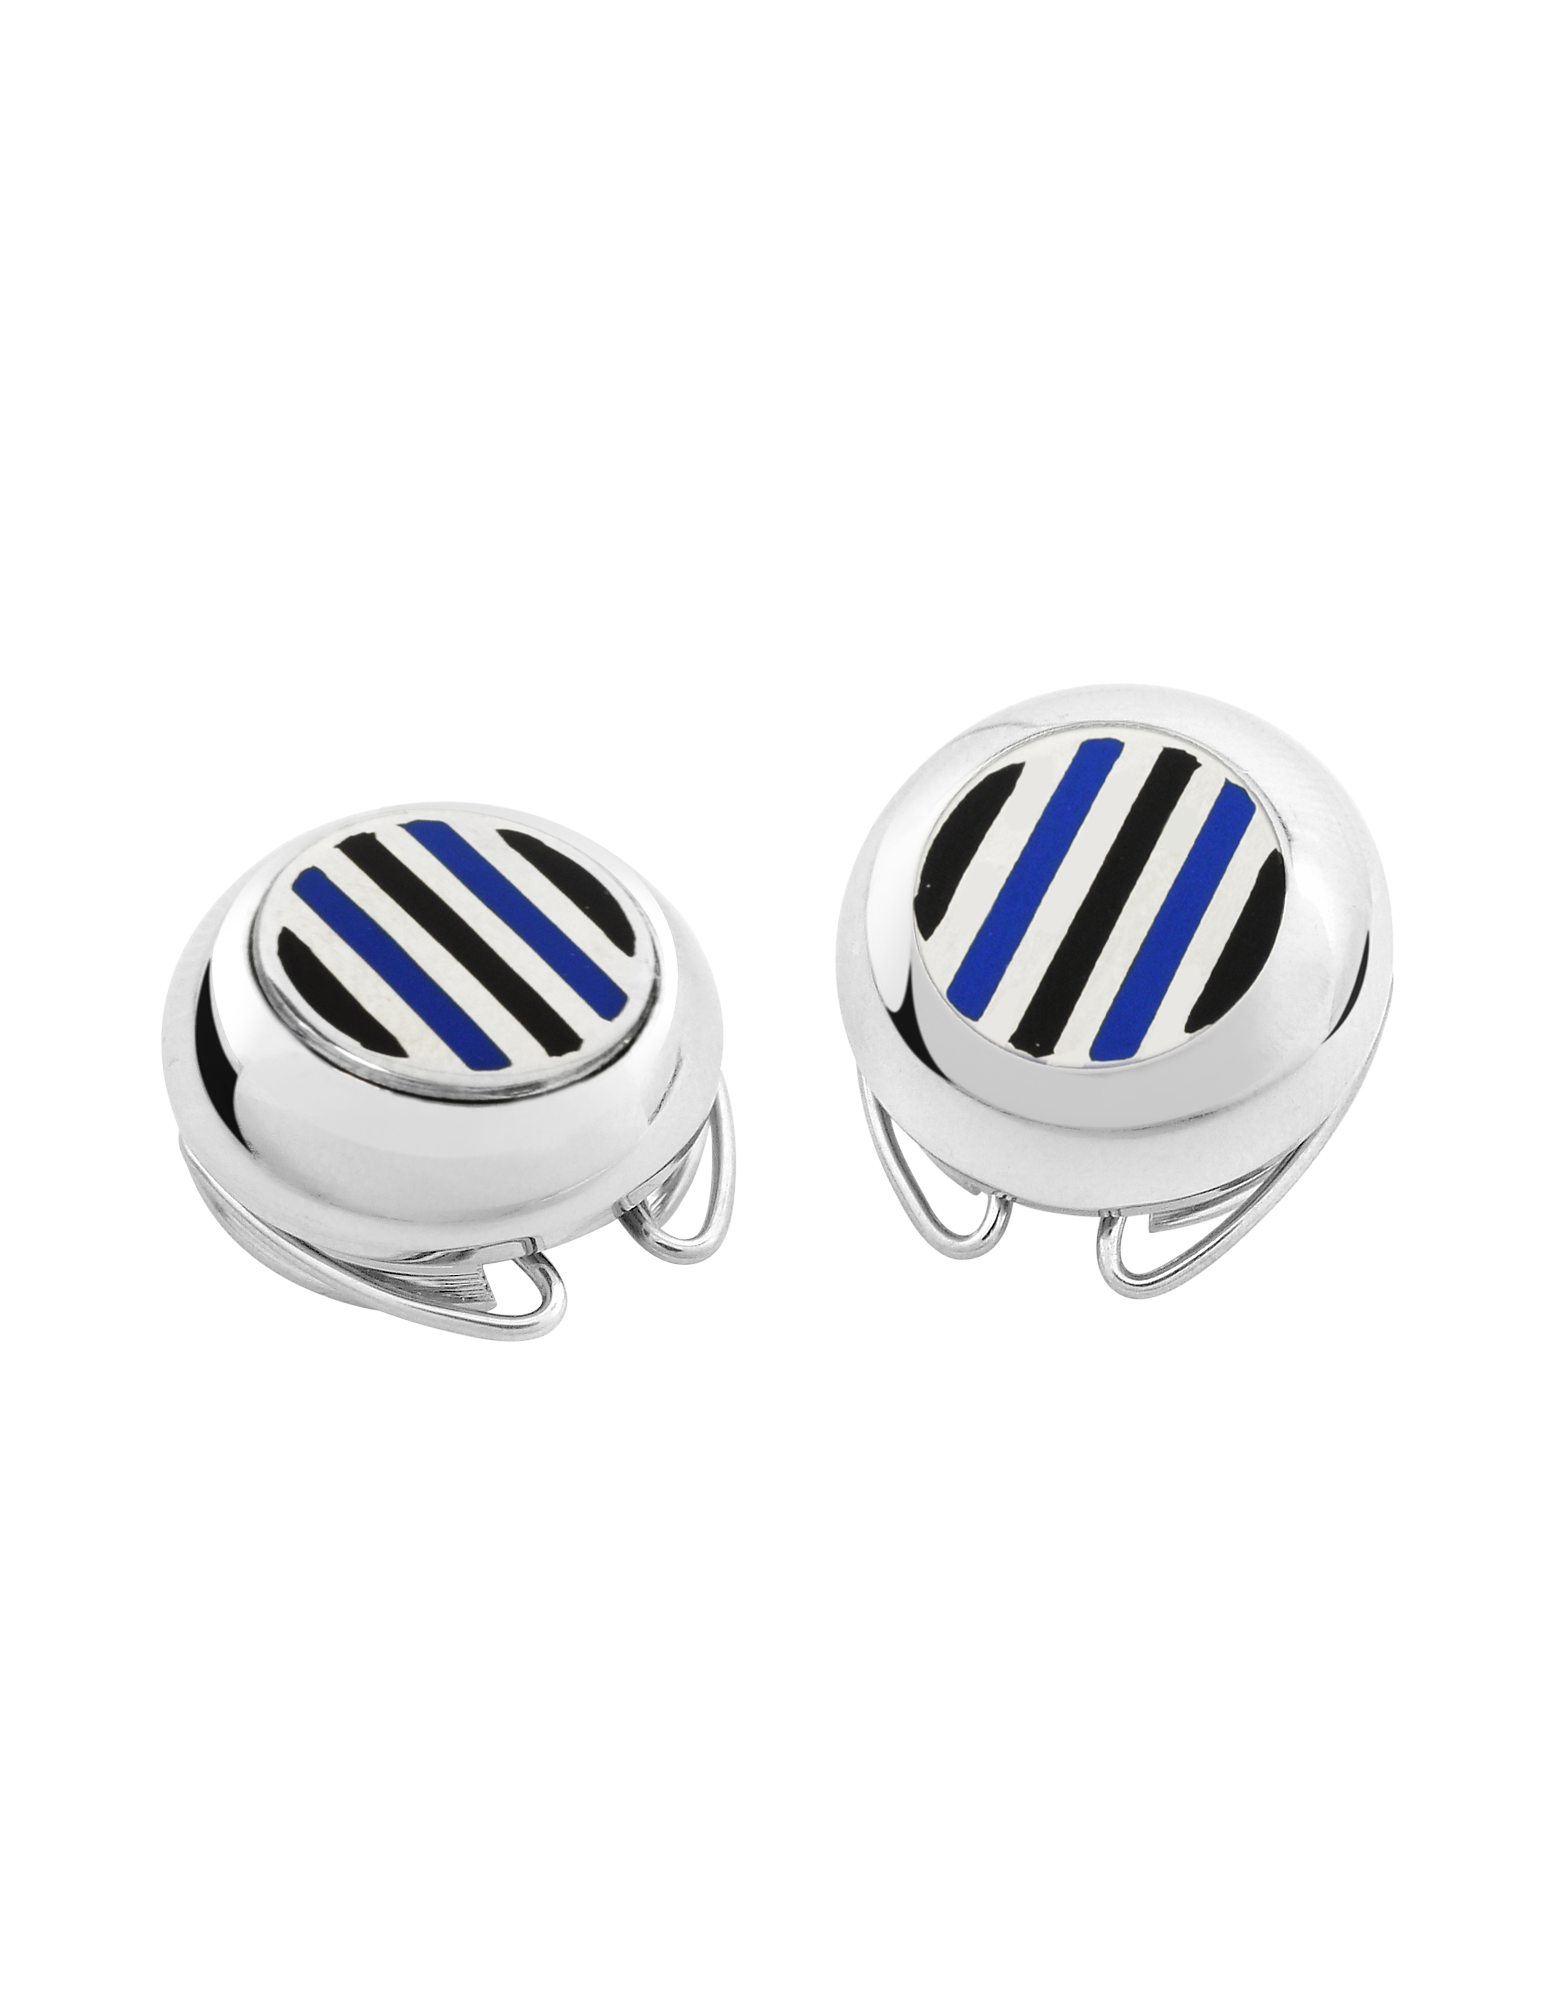 

Striped Silver Plated Button Covers, Blue